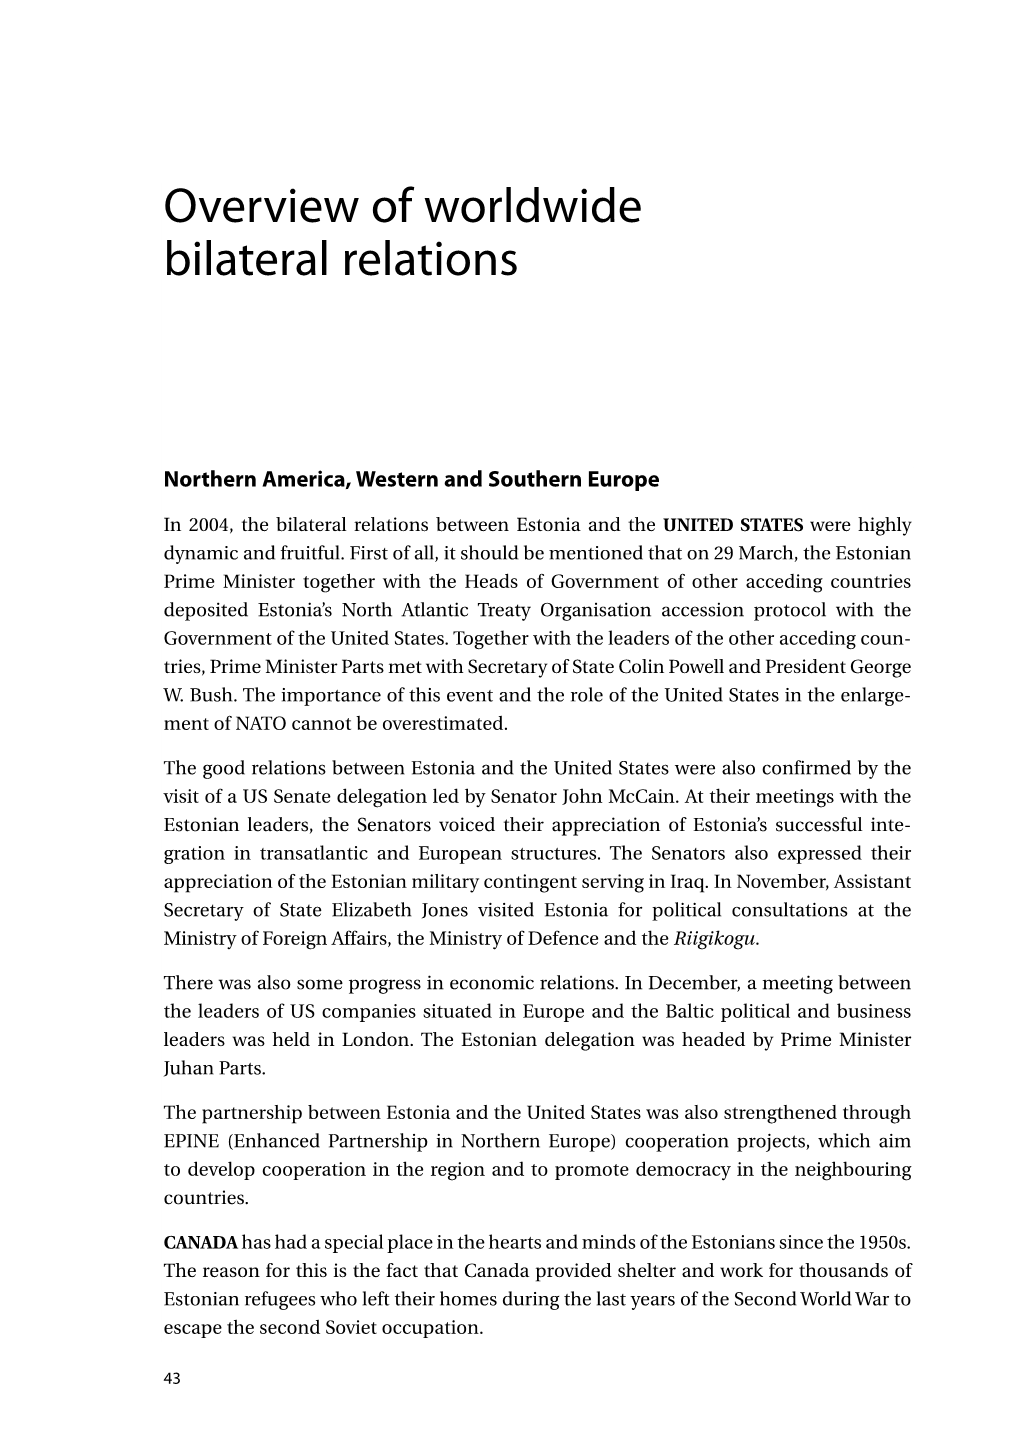 Overview of Worldwide Bilateral Relations